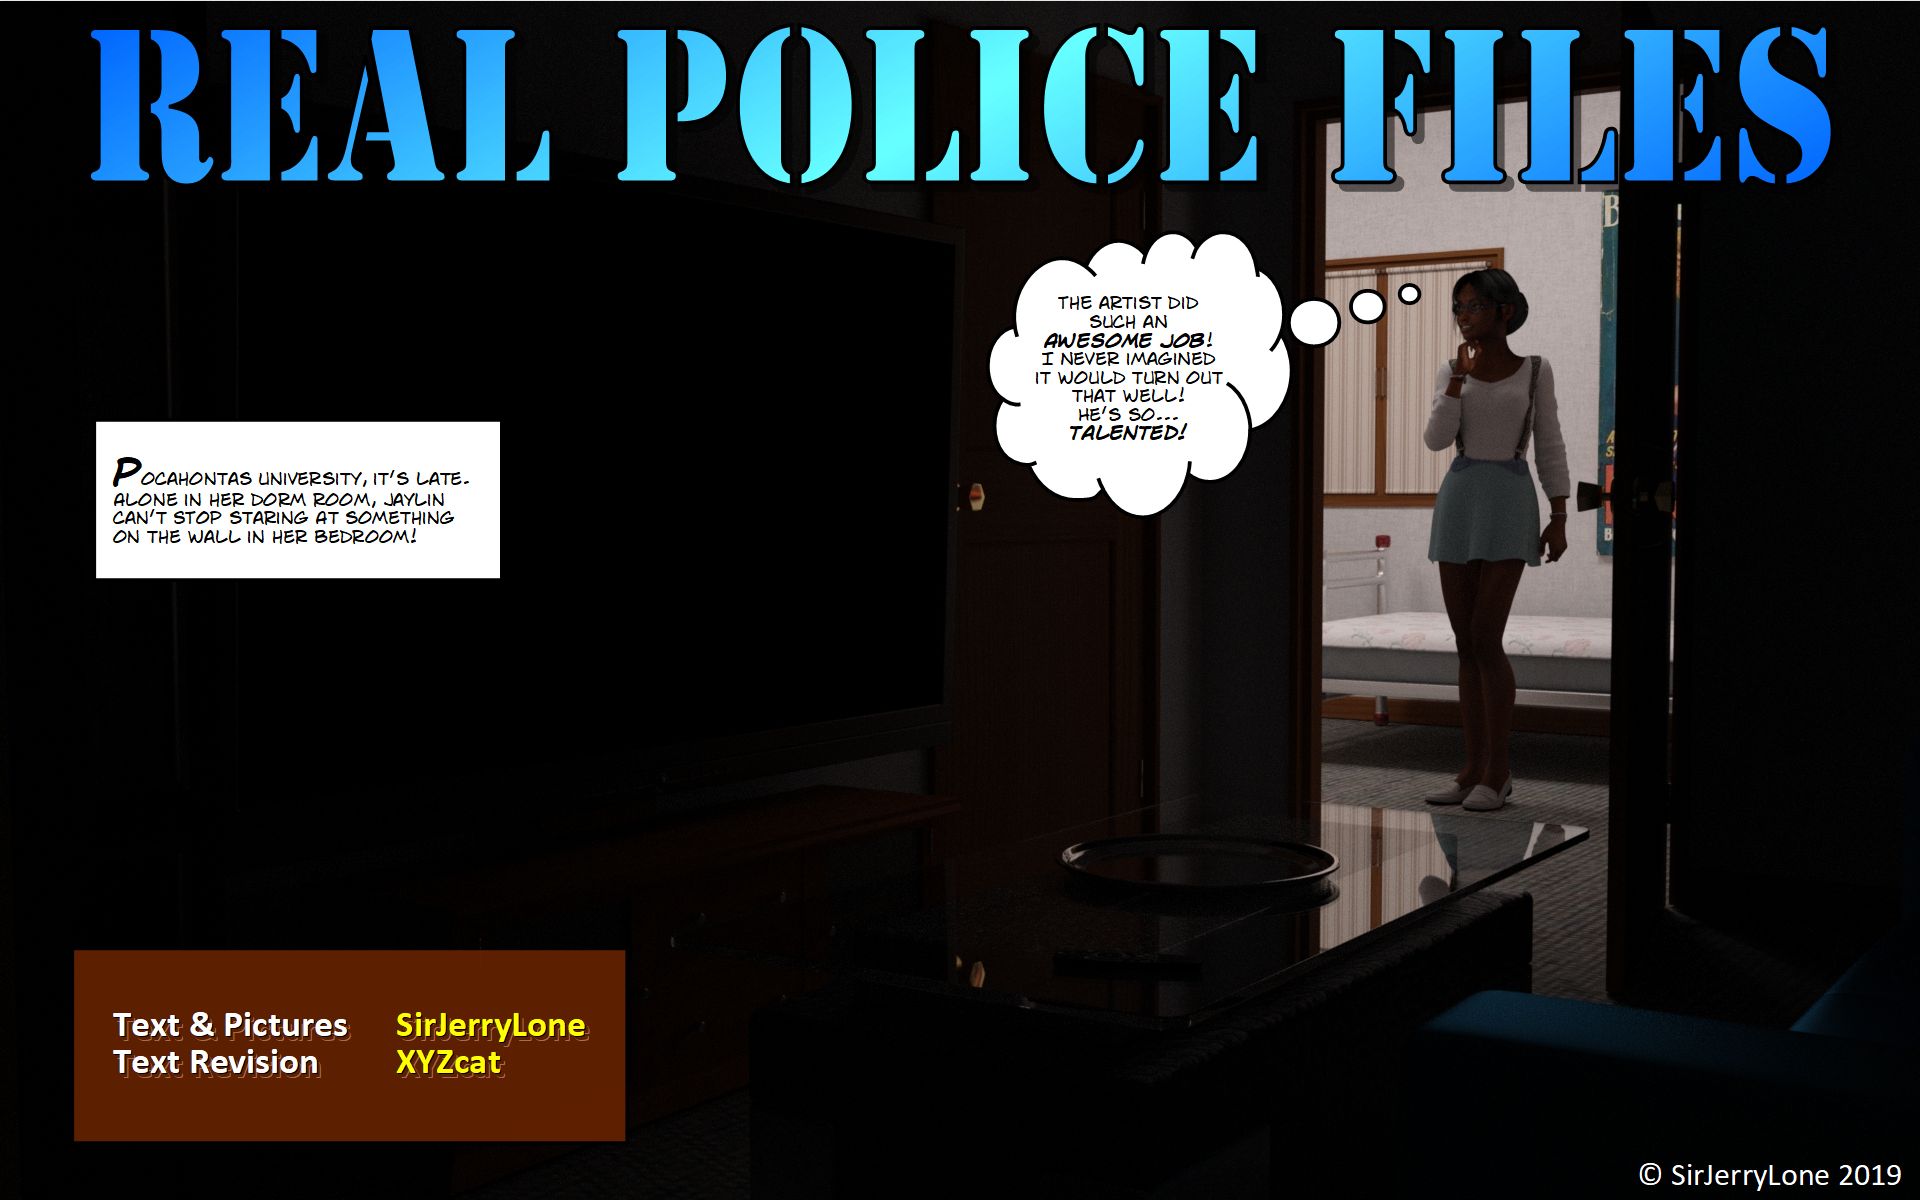 Real Police Files - 055 by SirJerryLone on DeviantArt